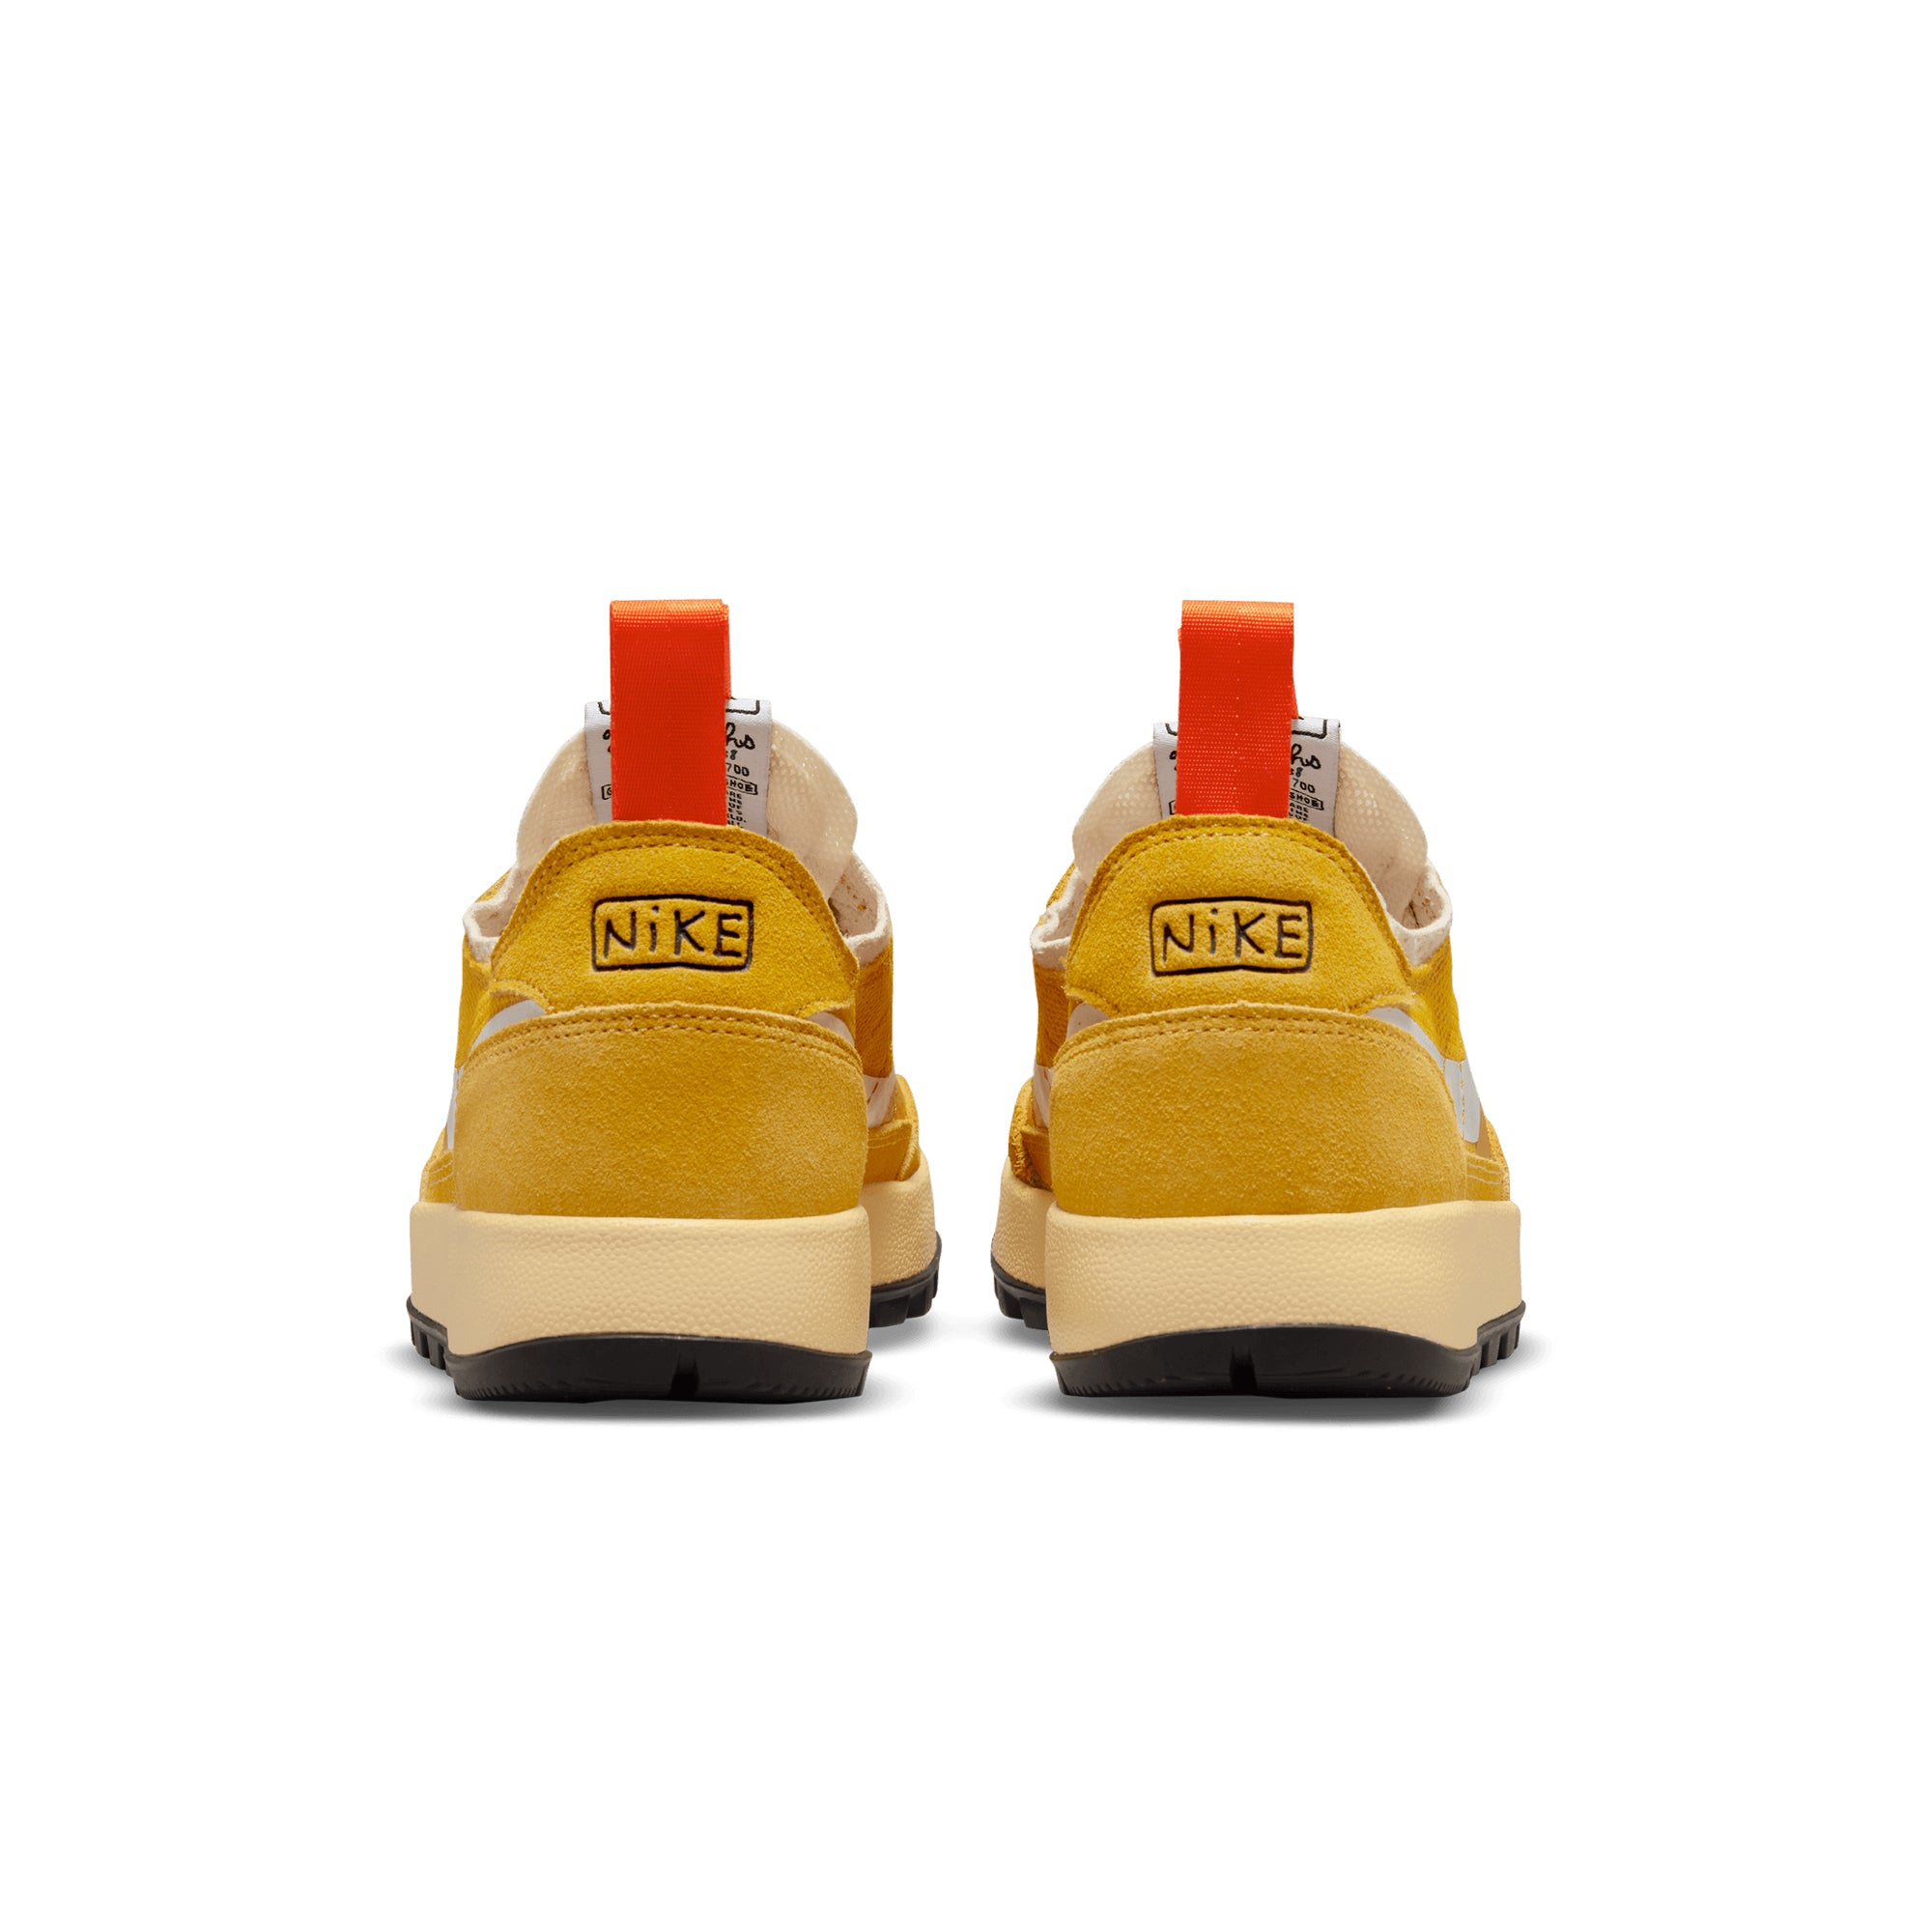 NikeCraft Tom Sachs General Purpose Shoes – Extra Butter